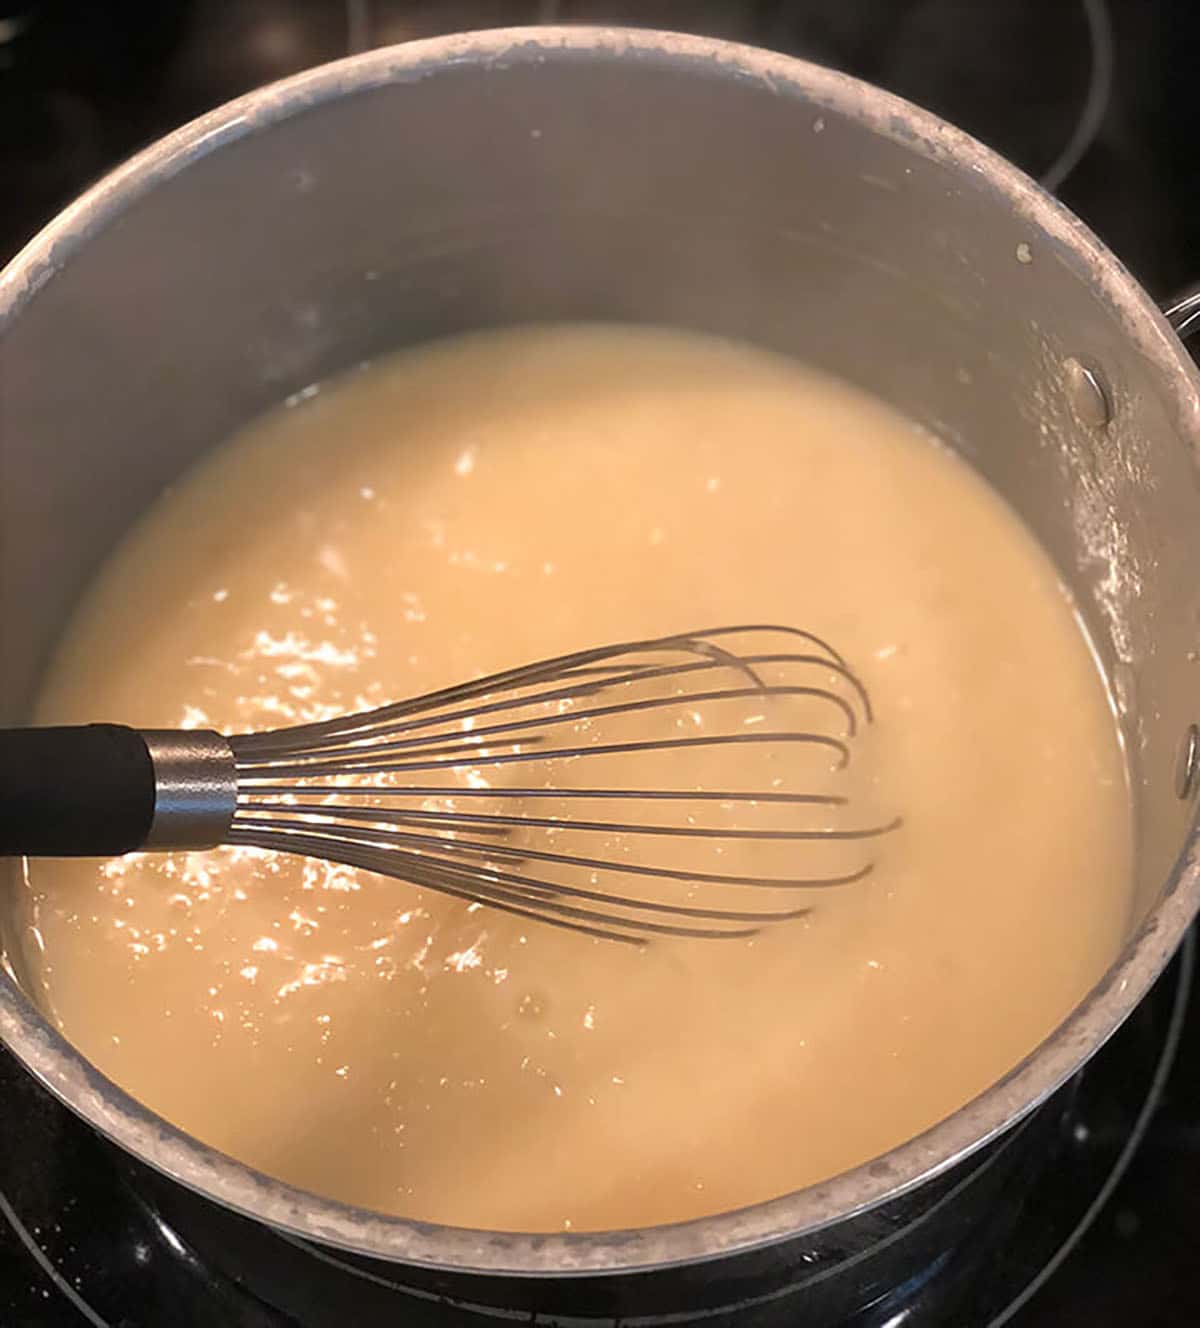 A whisk in a pot of creamy sauce cooking on a stove.